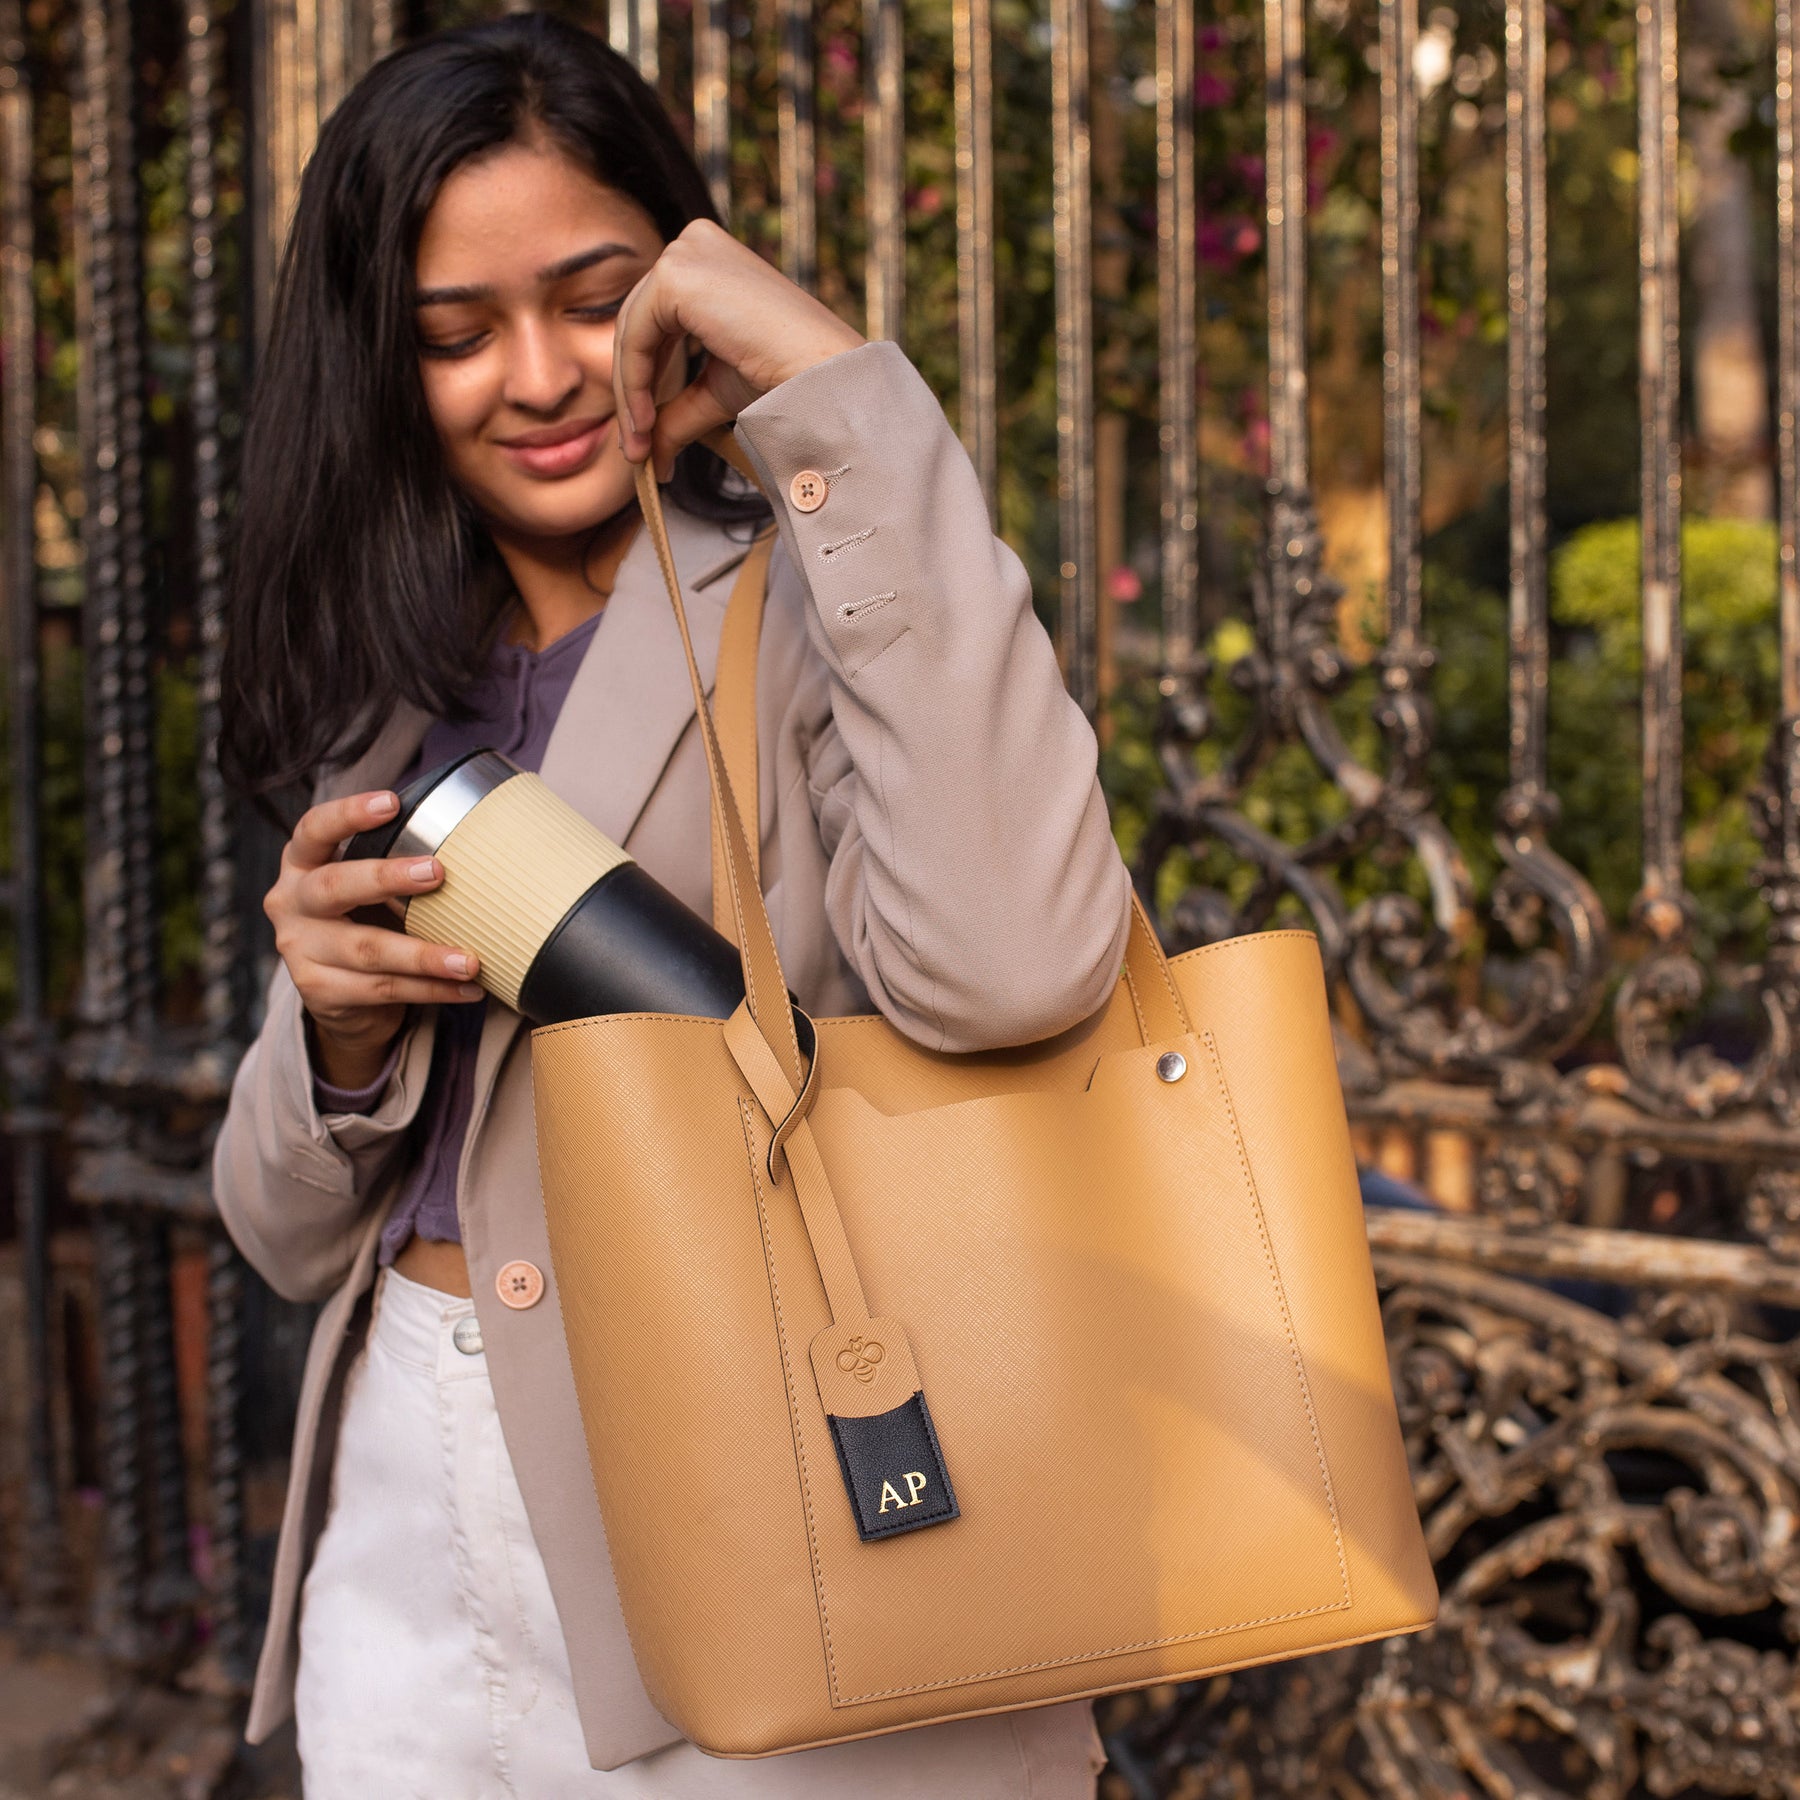 5 Tote bags that will fit your laptop perfectly   Times of India